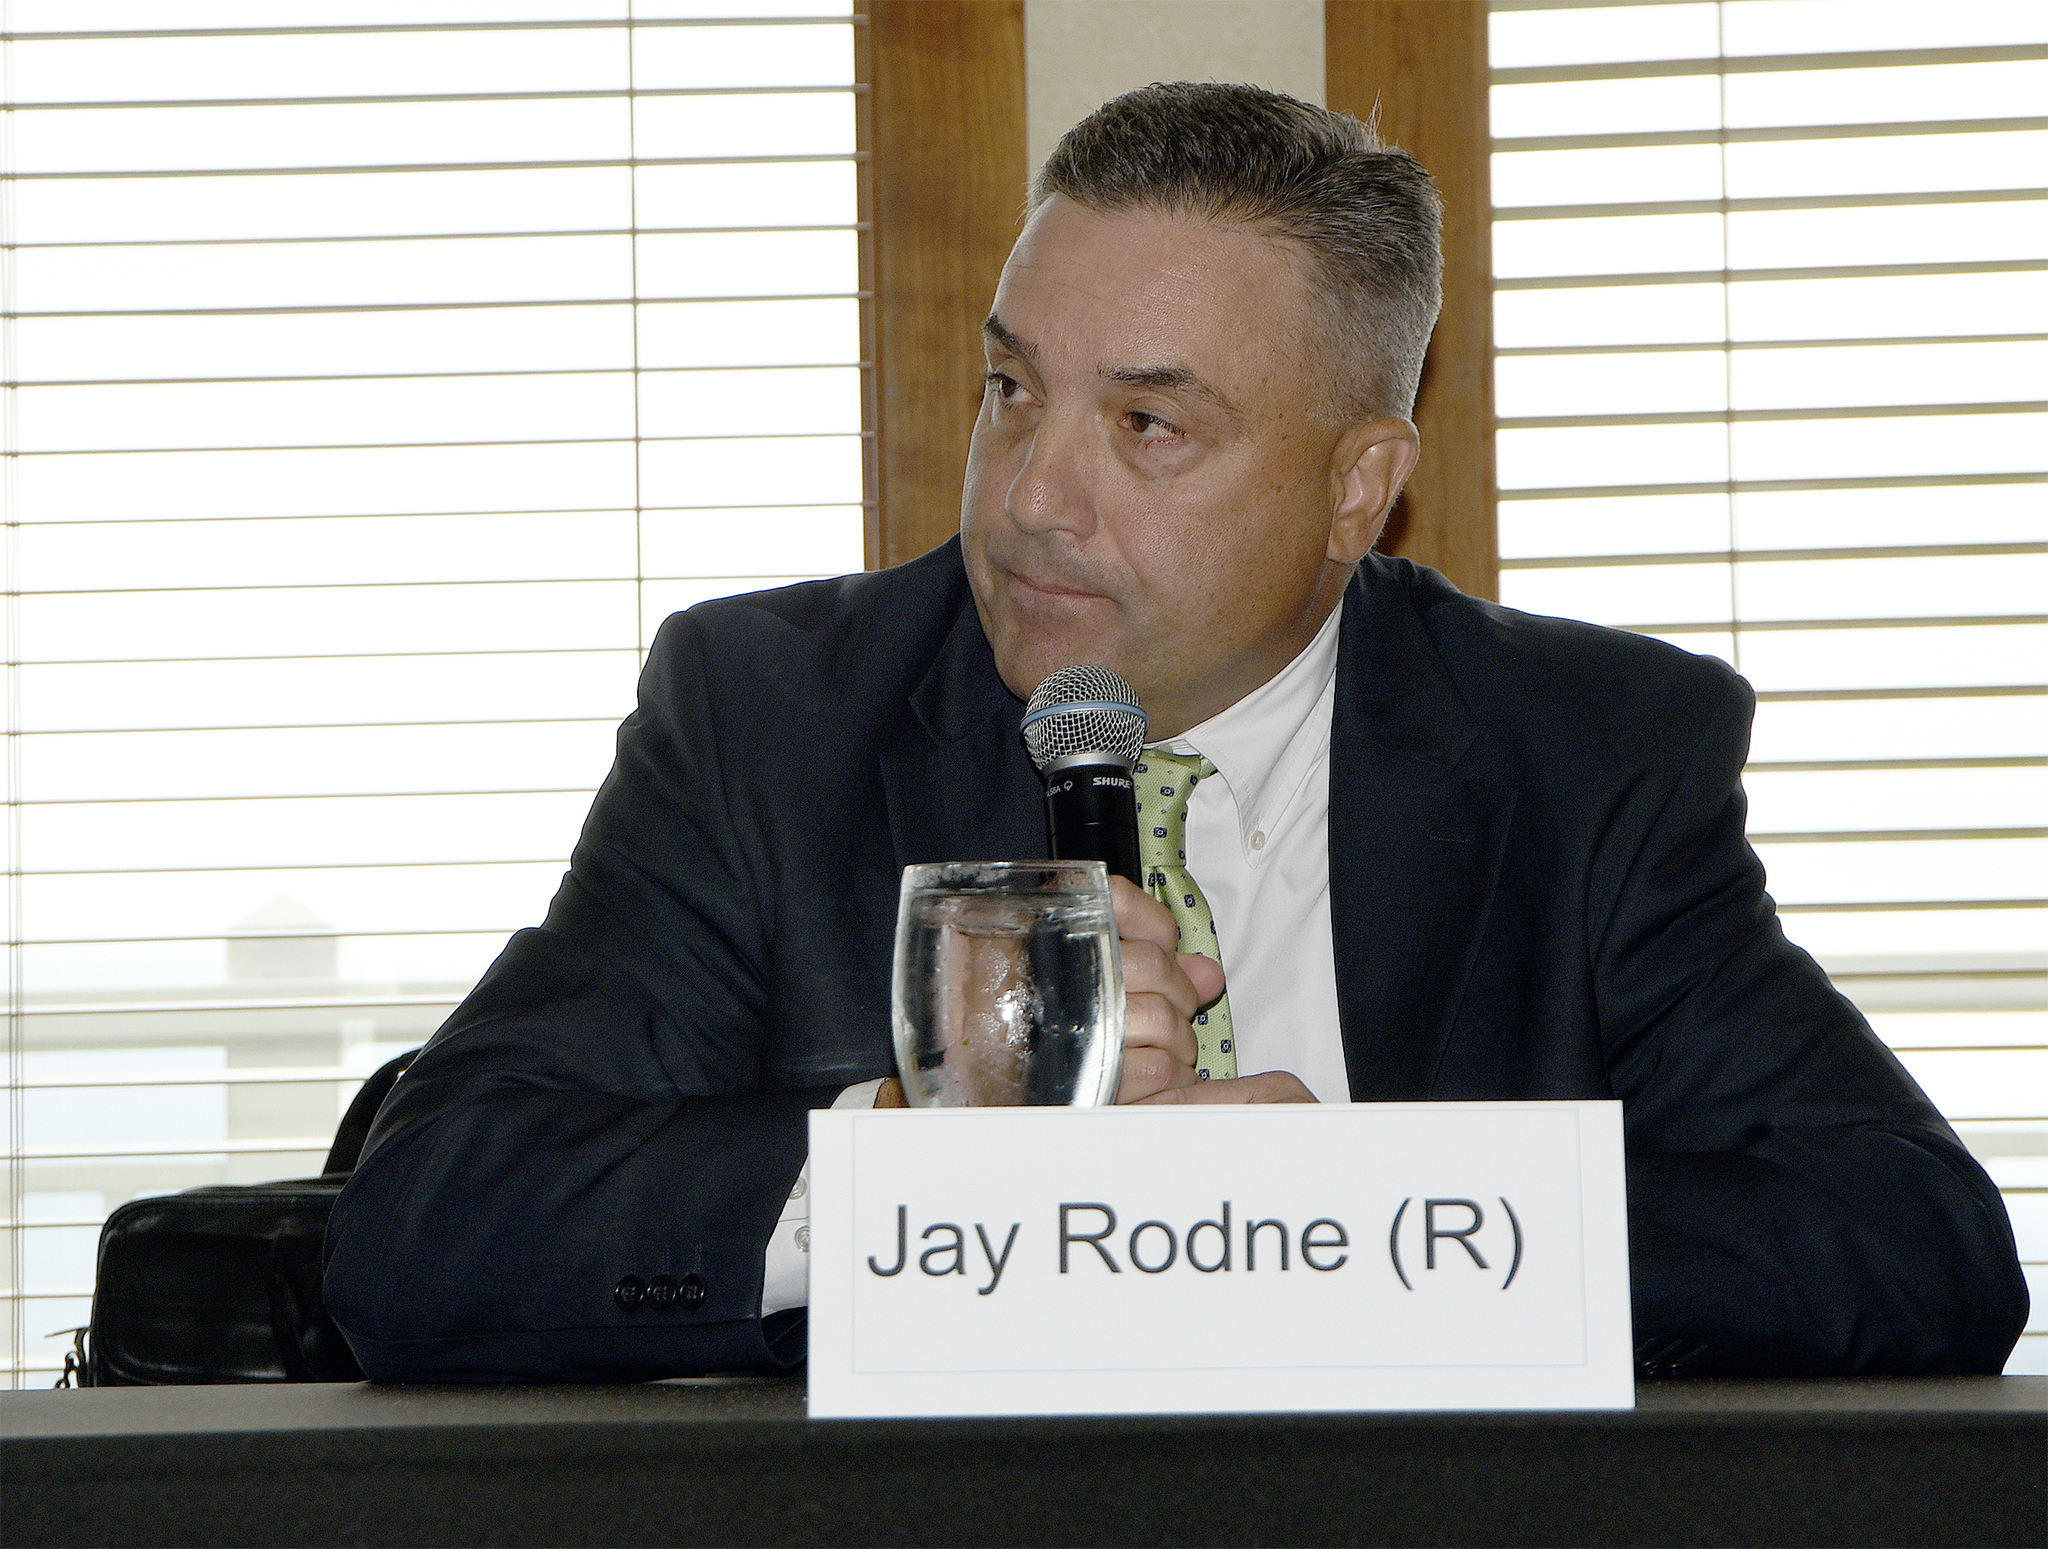 Representative Jay Rodne, pictured speaking at a local candidate forum in 2016, announced Feb. 28 that he does not intend to seek re-election this year. (File Photo)